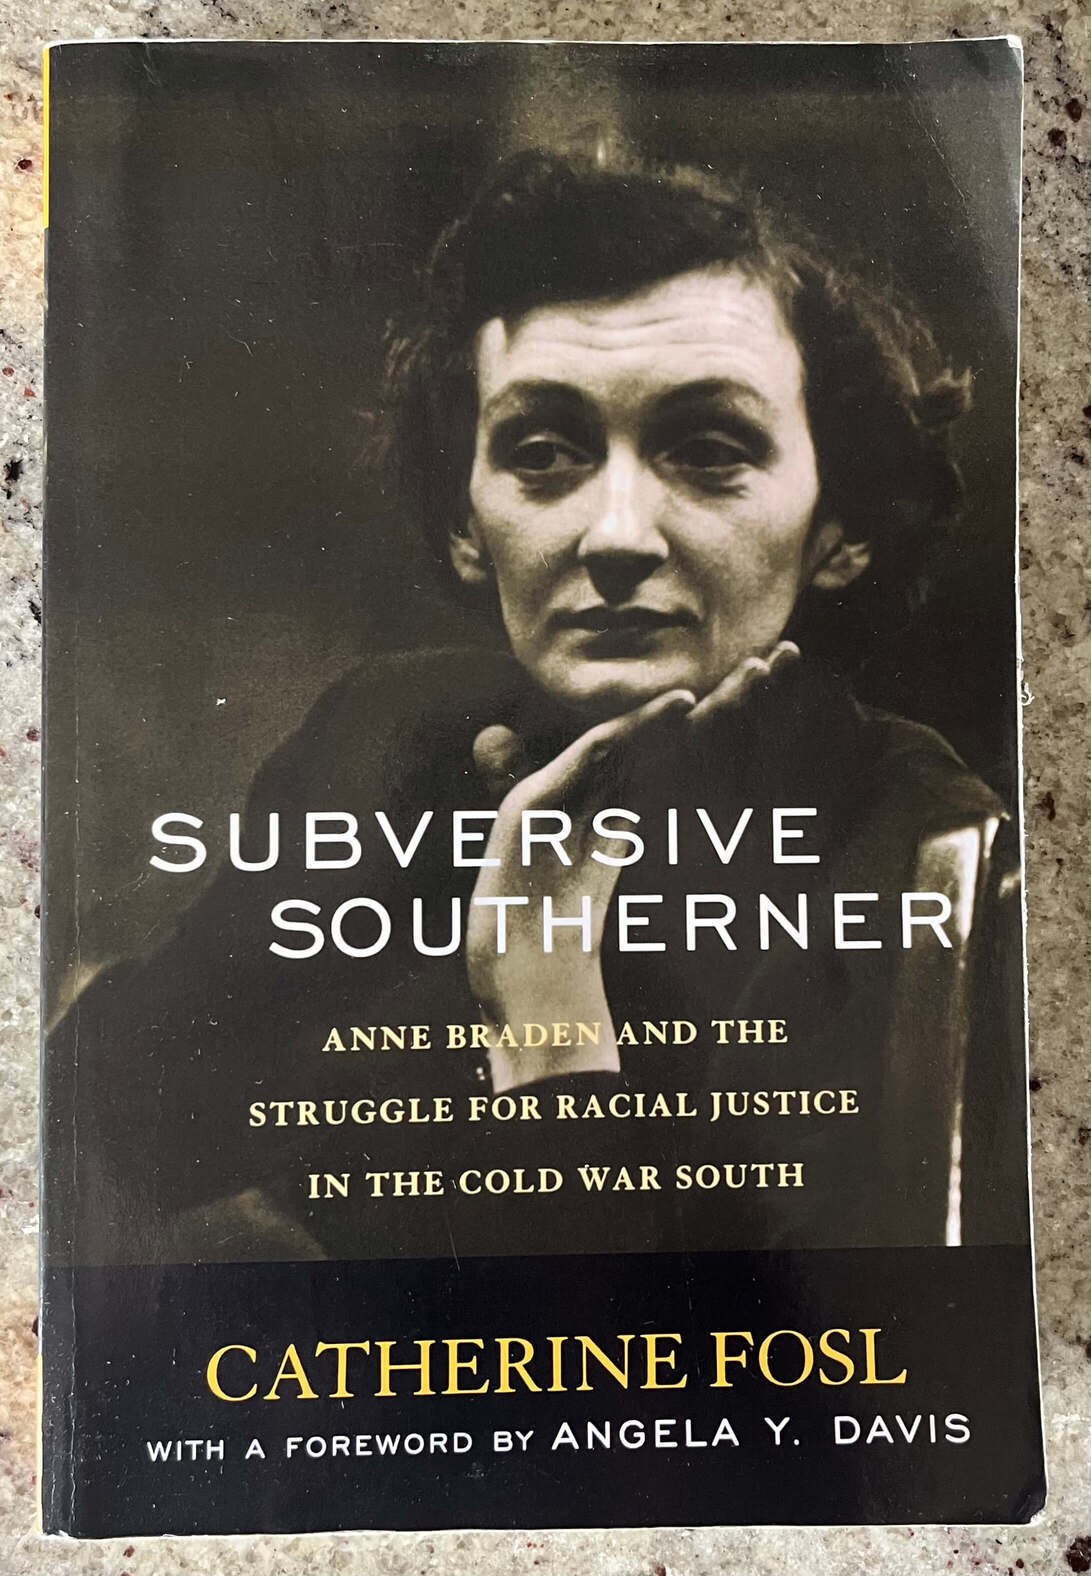 “Subversive Southerner: Anne Braden and the Struggle for Racial Justice in the Cold War South” by Catherine Fosl. With a foreword by Angela Y. Davis.